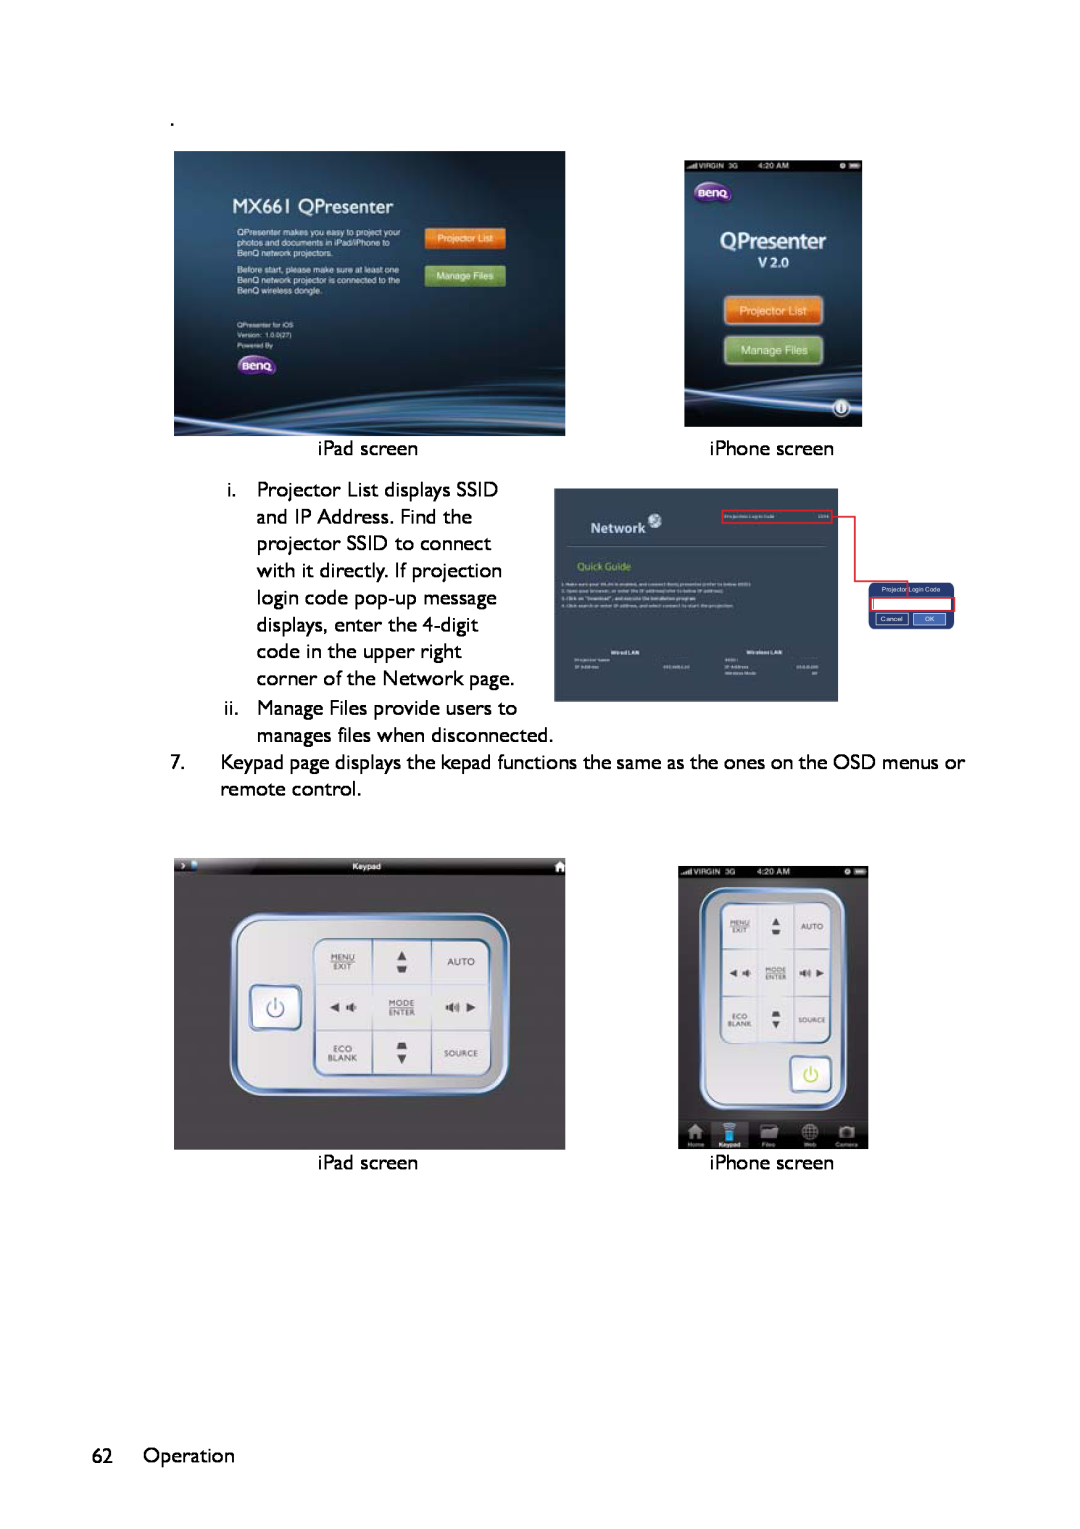 BenQ MX661 user manual ii. Manage Files provide users to manages files when disconnected, iPhone screen 